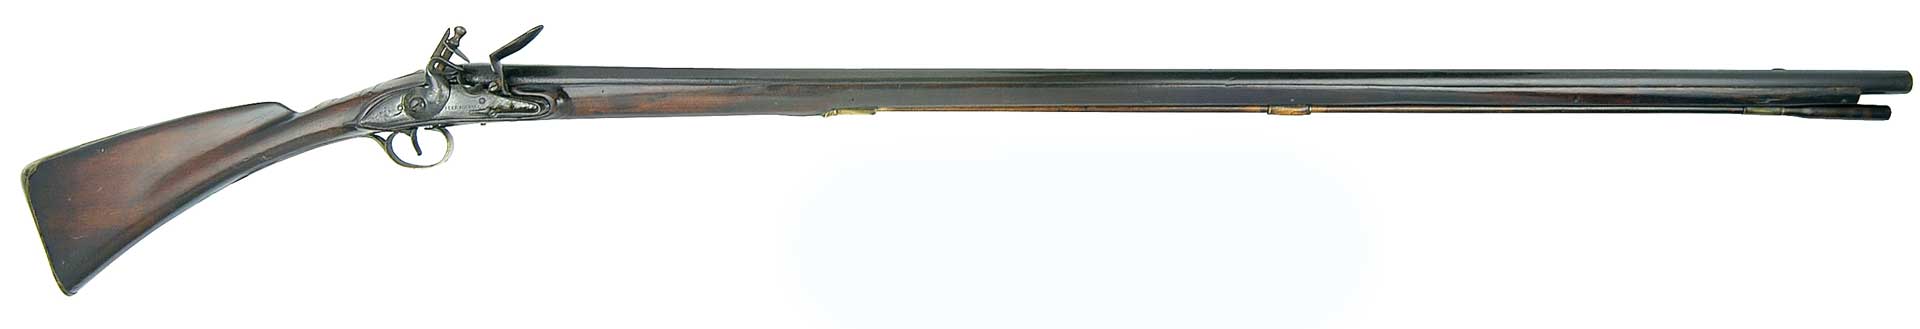 right side colonial gun brown wood metal silver action